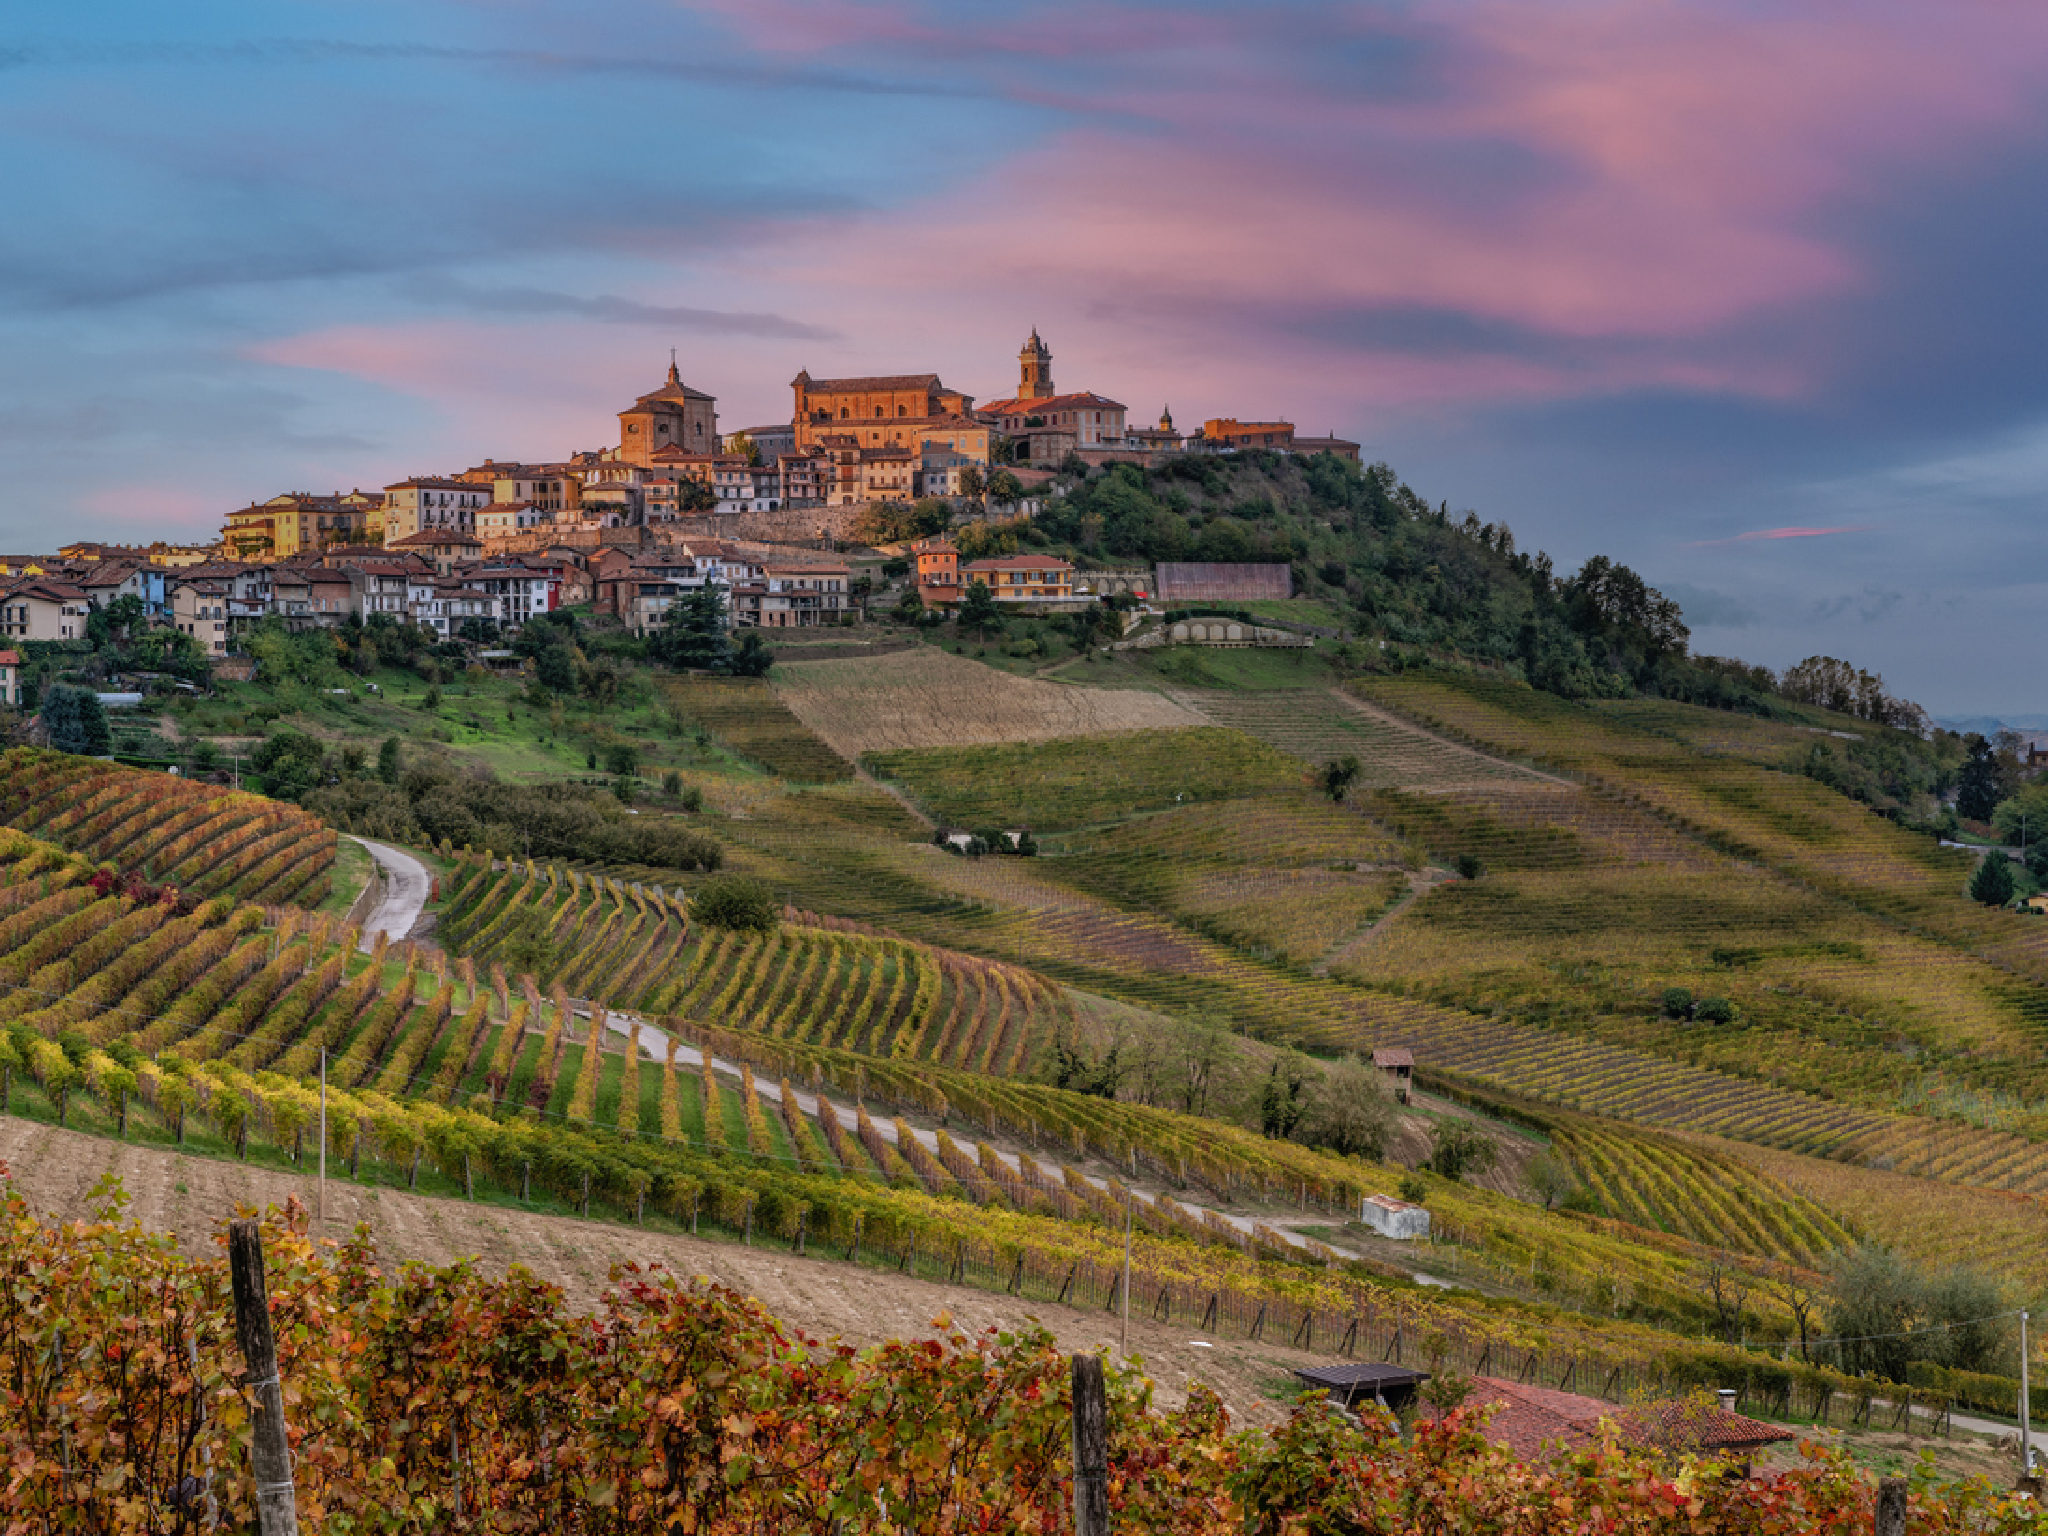 Terracotta hilltop towns overlook sprawling vineyards in the Piedmont region of Italy